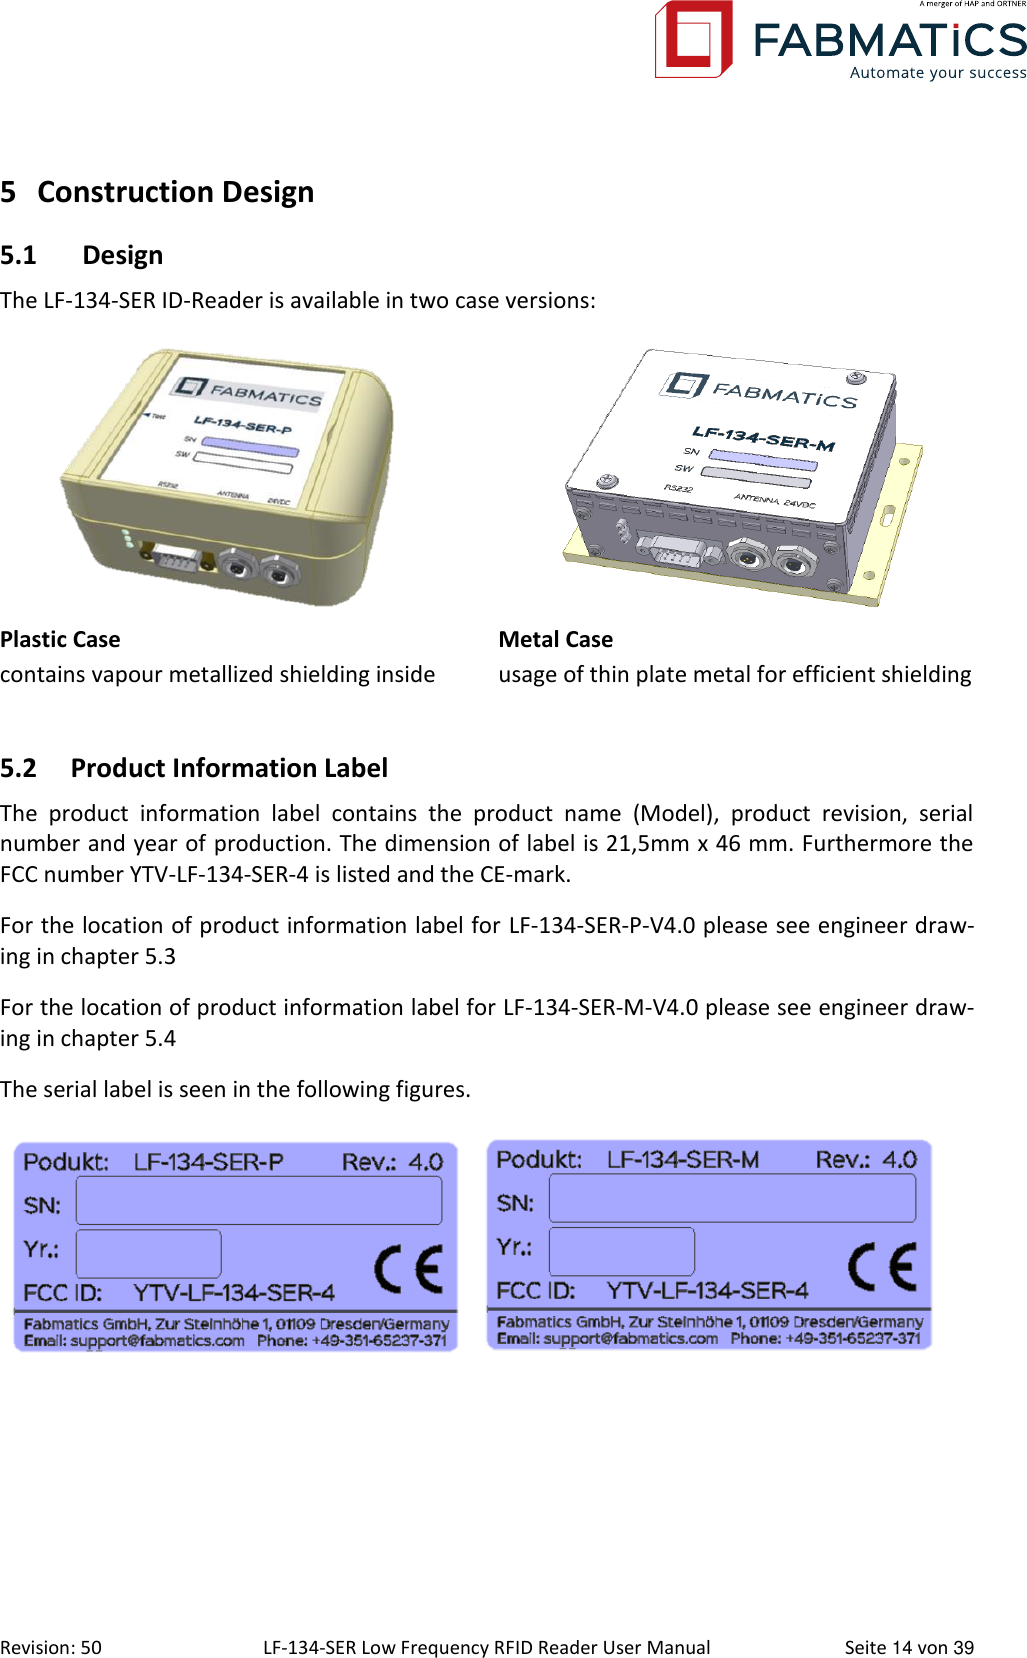  Revision: 50 LF-134-SER Low Frequency RFID Reader User Manual  Seite 14 von 39 5 Construction Design 5.1 Design The LF-134-SER ID-Reader is available in two case versions:   Plastic Case contains vapour metallized shielding inside Metal Case usage of thin plate metal for efficient shielding  5.2 Product Information Label The  product  information  label  contains  the  product  name  (Model),  product  revision,  serial number and year of production. The dimension of label is 21,5mm x 46 mm. Furthermore the FCC number YTV-LF-134-SER-4 is listed and the CE-mark.  For the location of product information label for LF-134-SER-P-V4.0 please see engineer draw-ing in chapter 5.3 For the location of product information label for LF-134-SER-M-V4.0 please see engineer draw-ing in chapter 5.4 The serial label is seen in the following figures.      